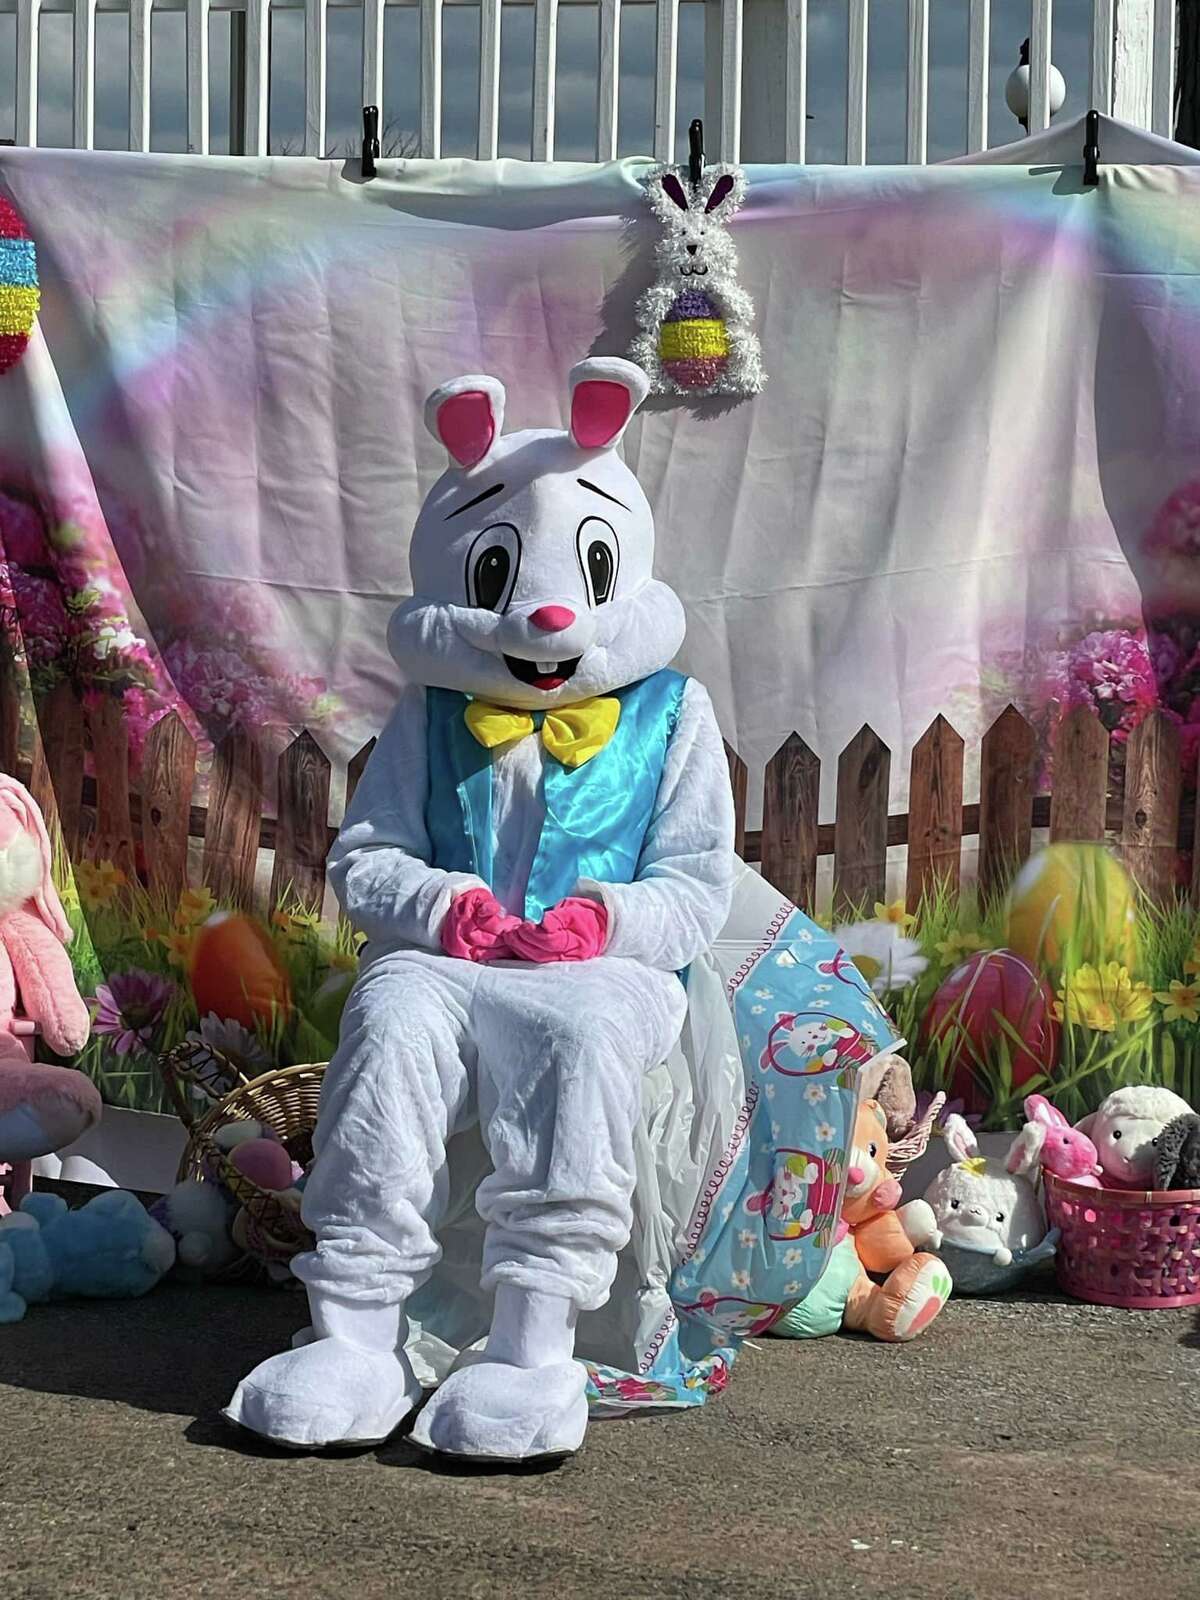 The Easter Bunny at East Haven's Easter Egg Hunt on Sunday, April 10, 2022.